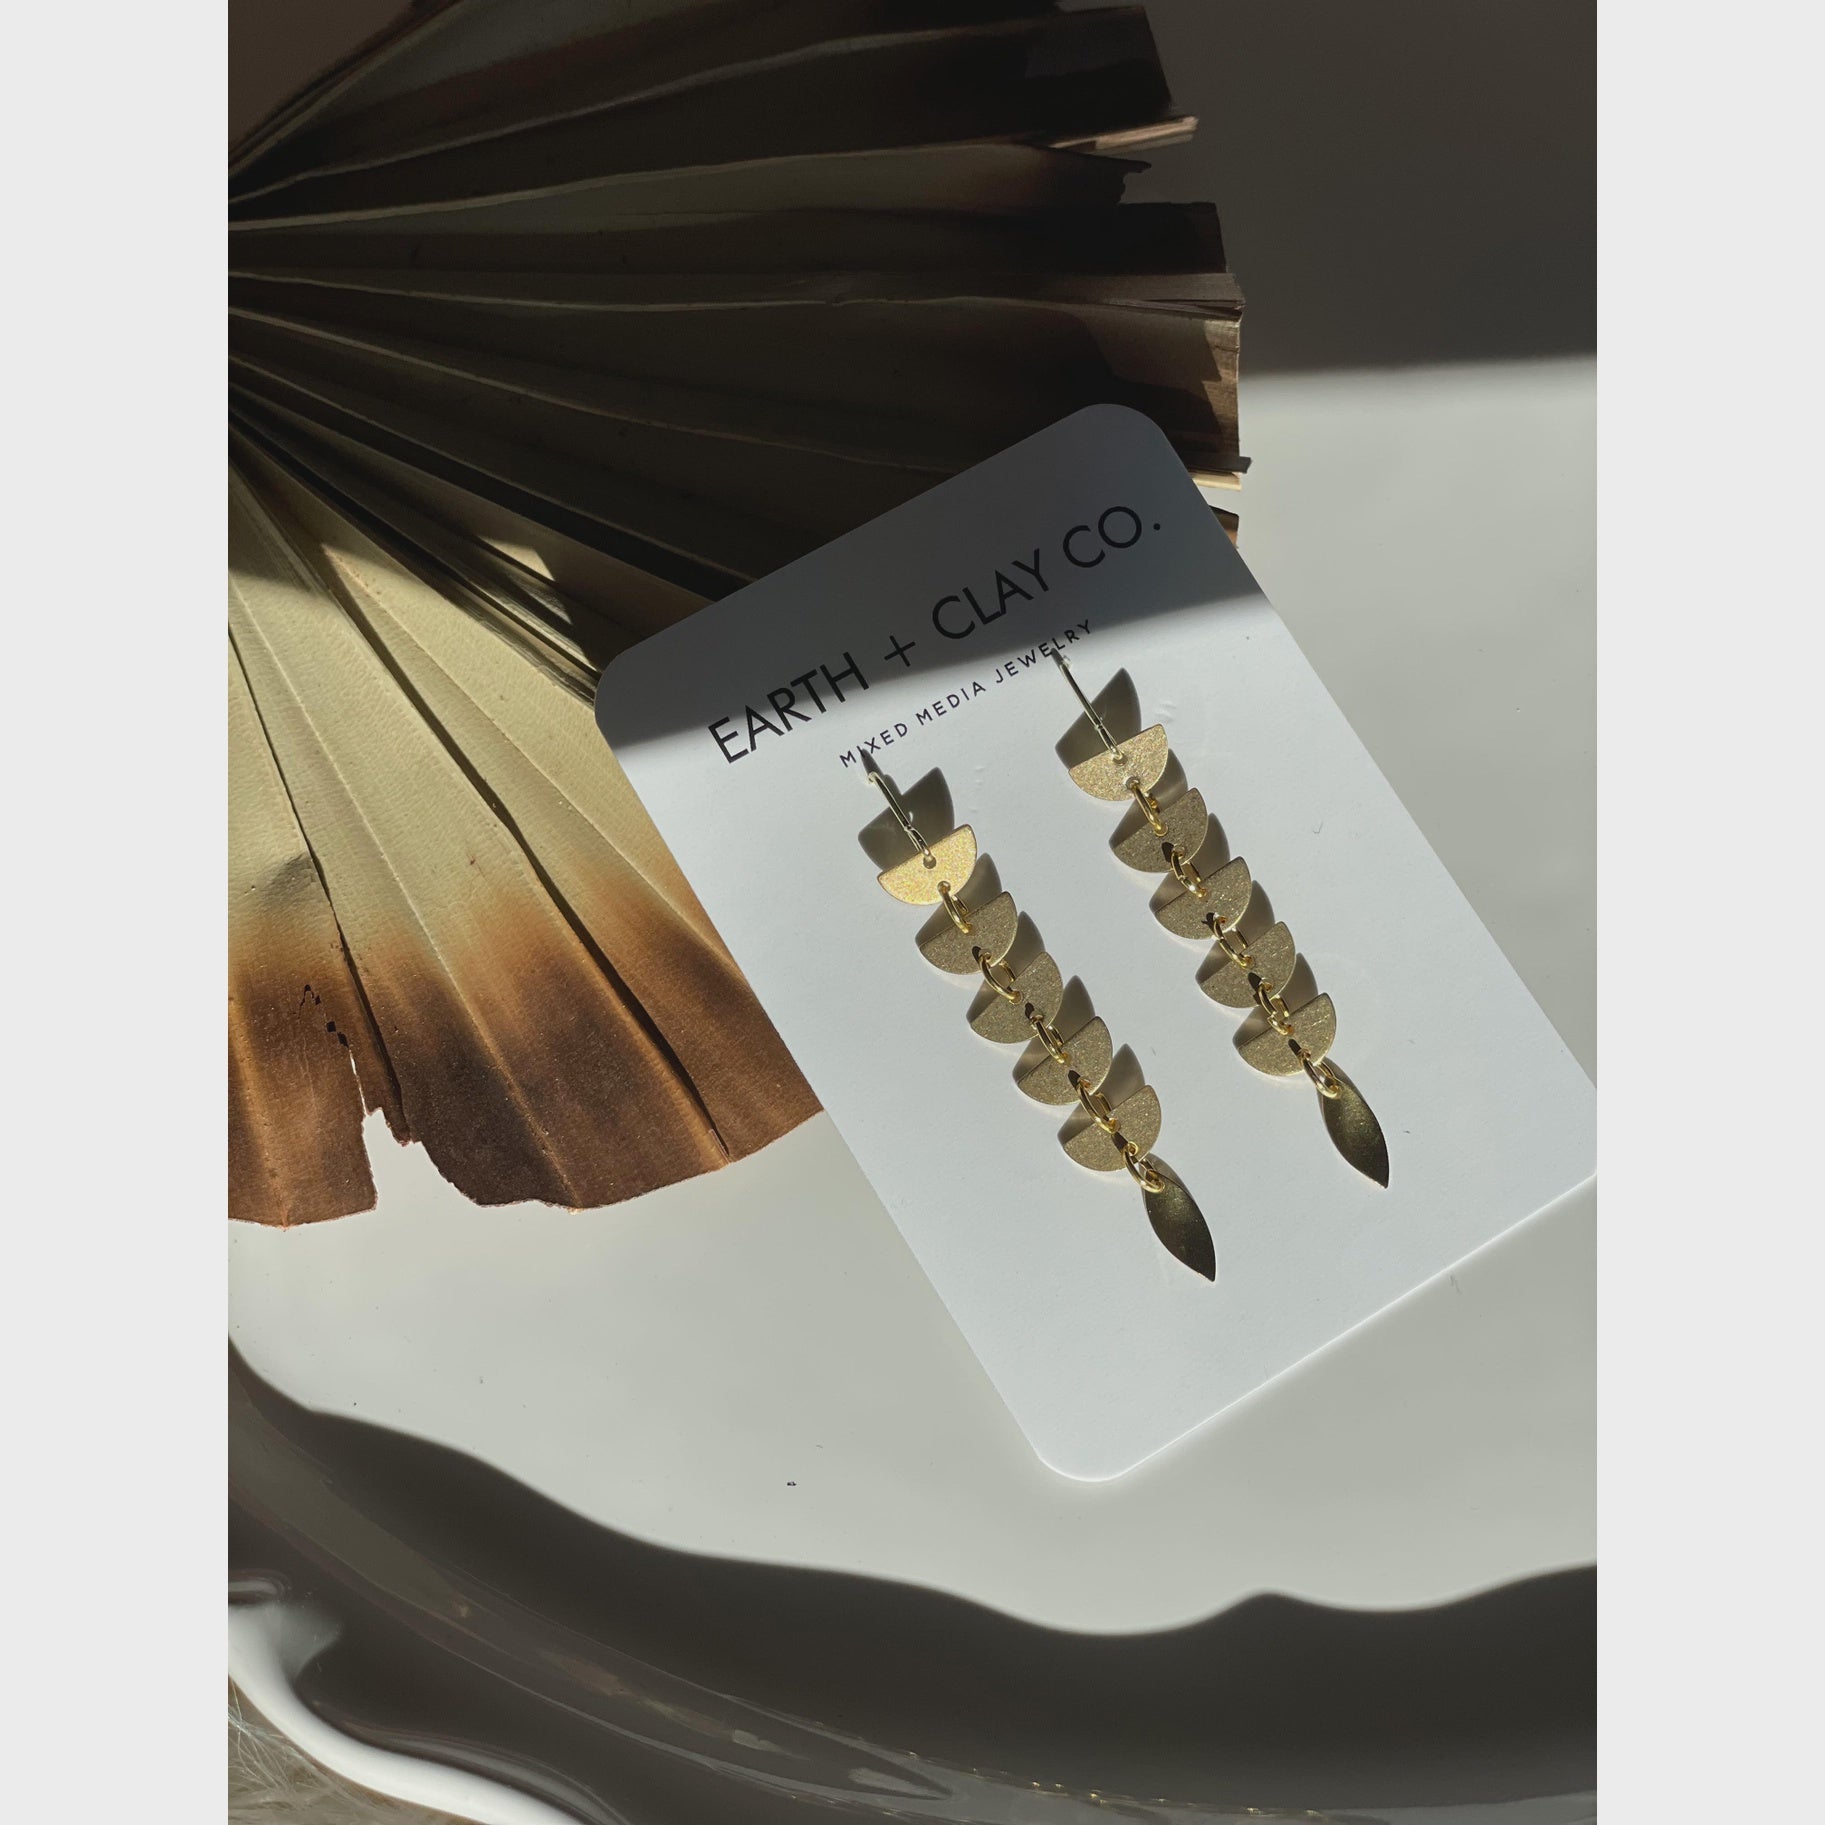 The Brass Cascading Dangle Earrings by Earth + Clay Collective